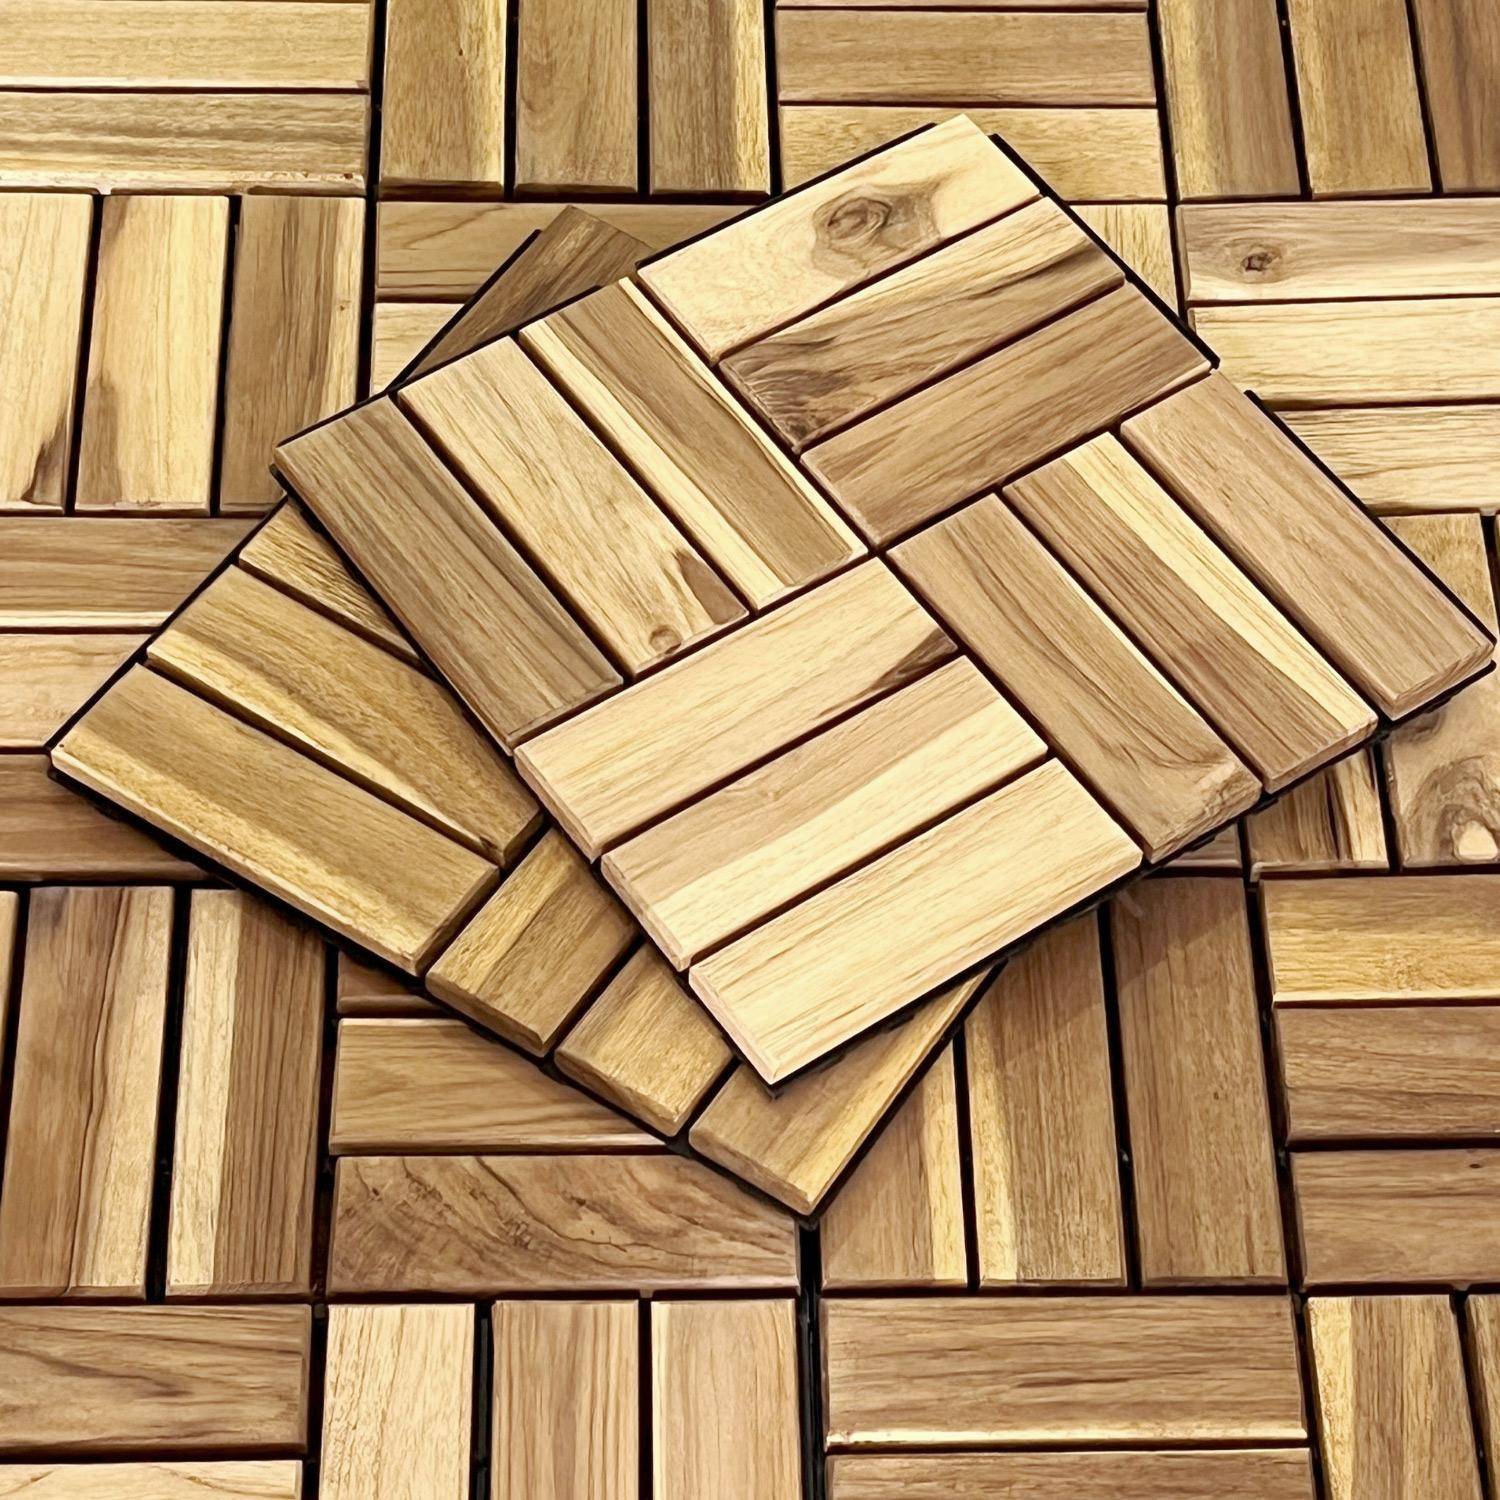 Batch of 36 acacia wood decking tiles 30x30cm, square pattern, clip-on Photo5